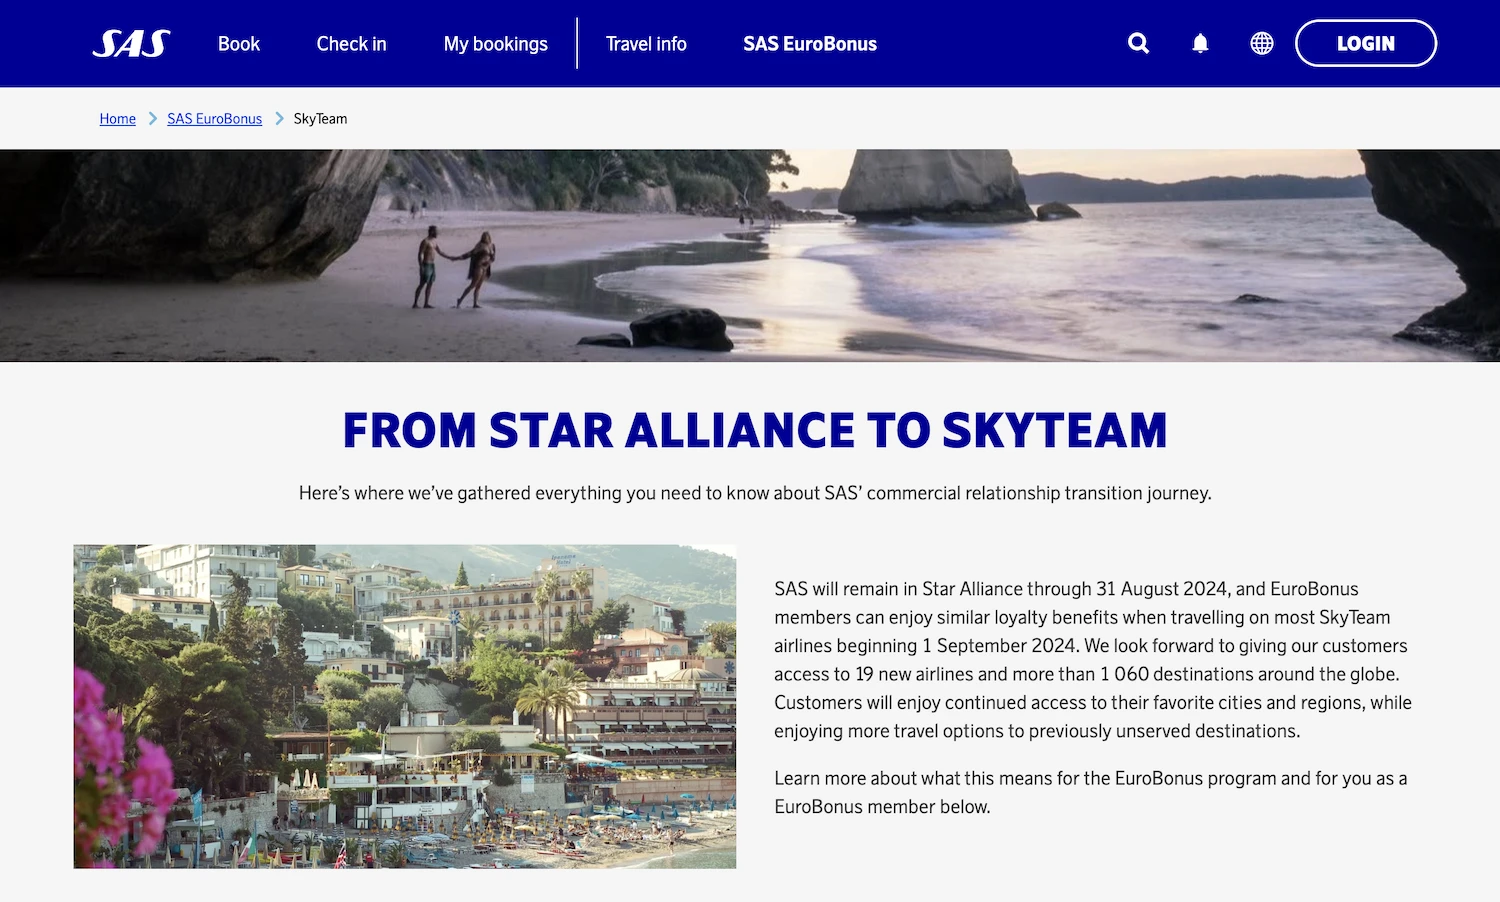 SAS announces official information about the EuroBonus transition from Star Alliance to SkyTeam.